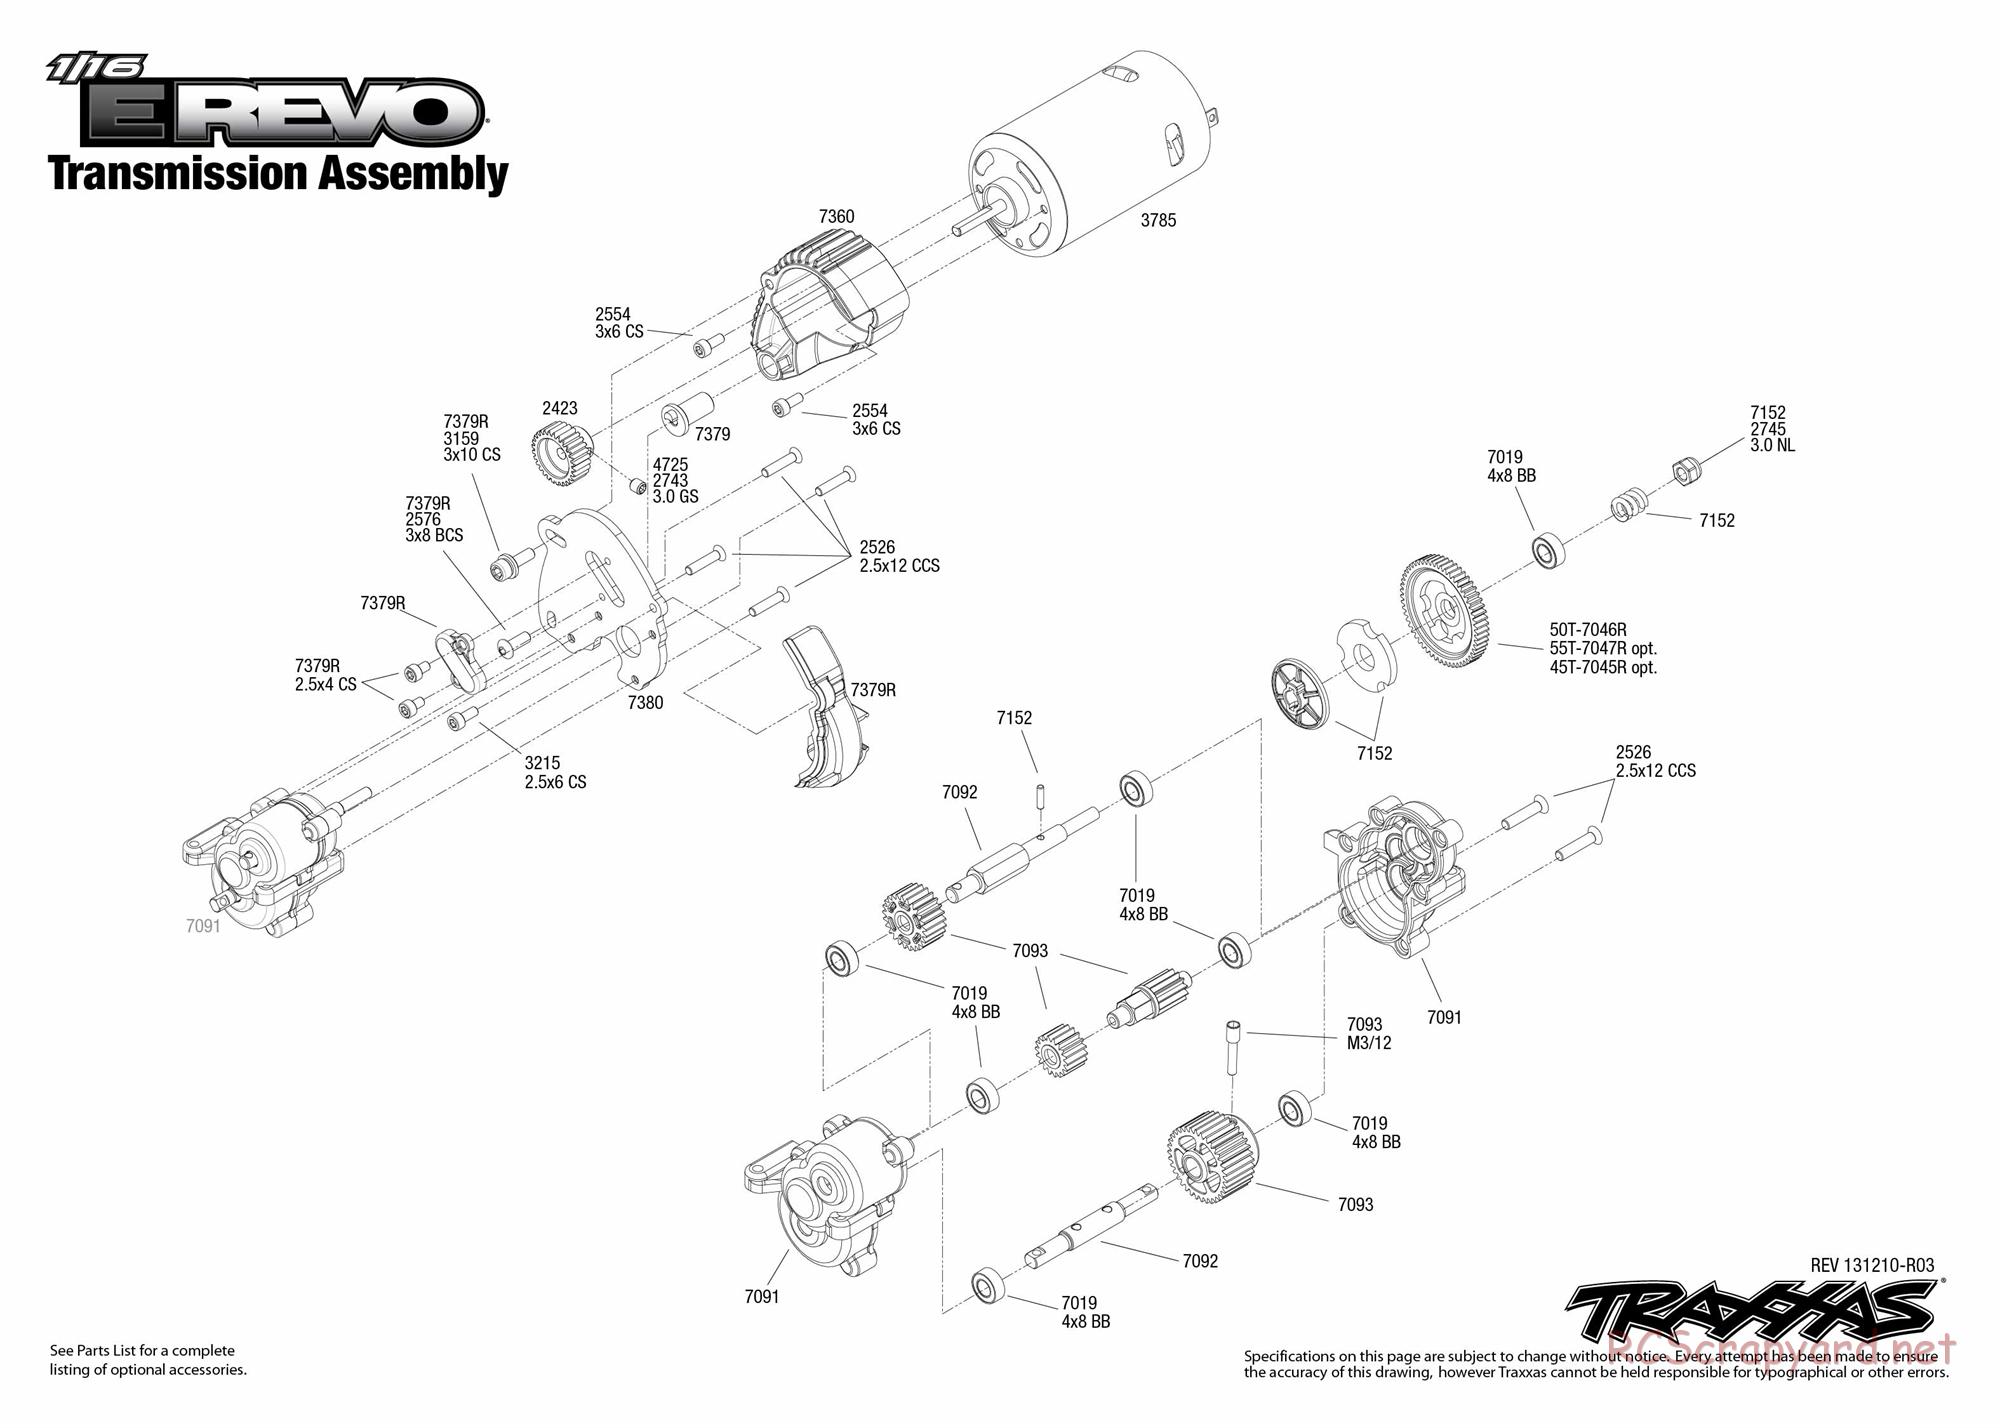 Traxxas - 1/16 E-Revo Brushed (2013) - Exploded Views - Page 5